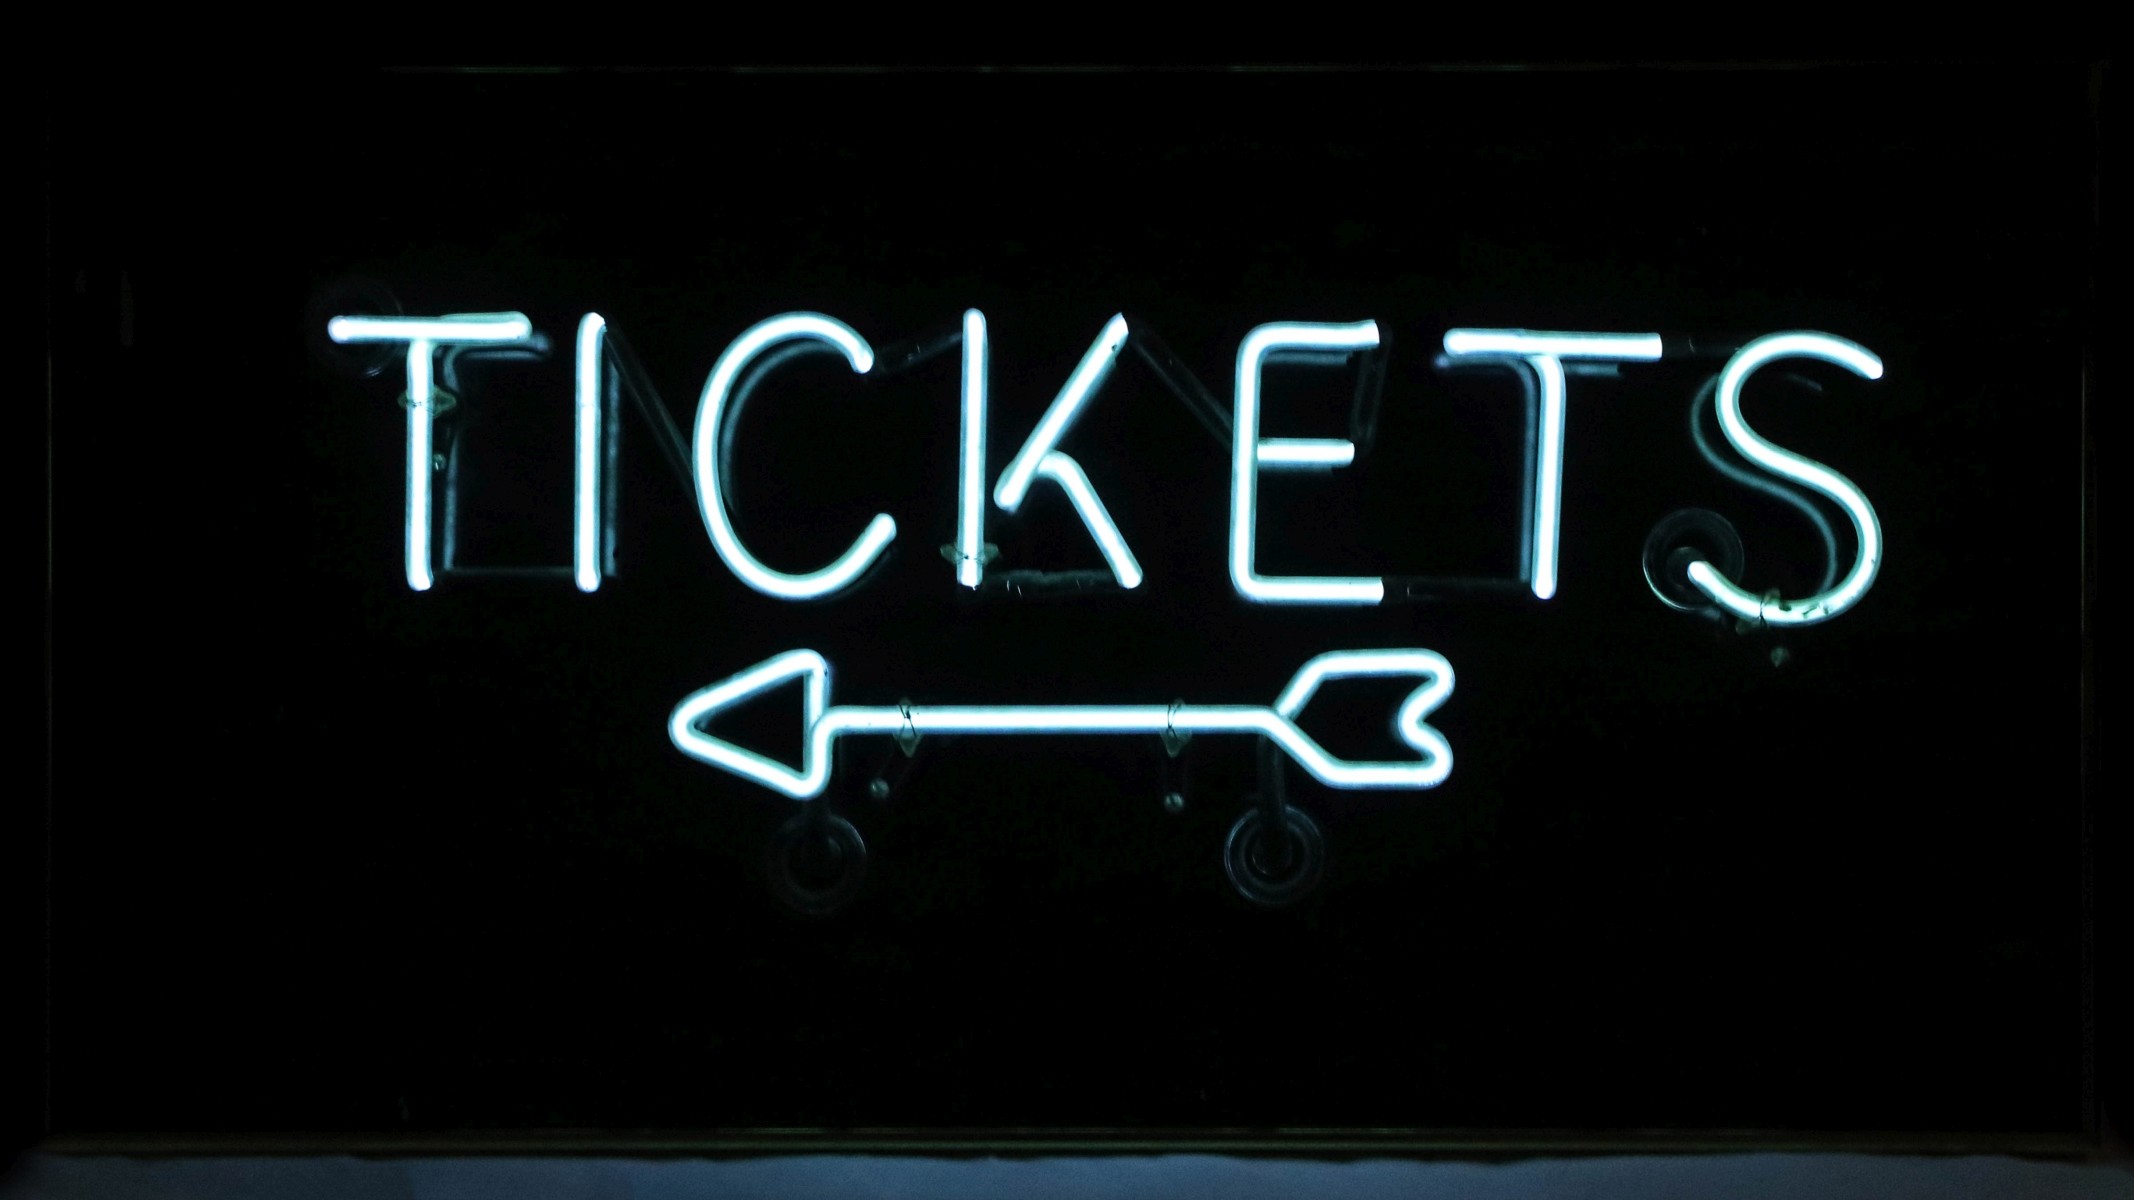 A NEON LETTER SIGN WITH ARROW AND THE WORD 'TICKETS'